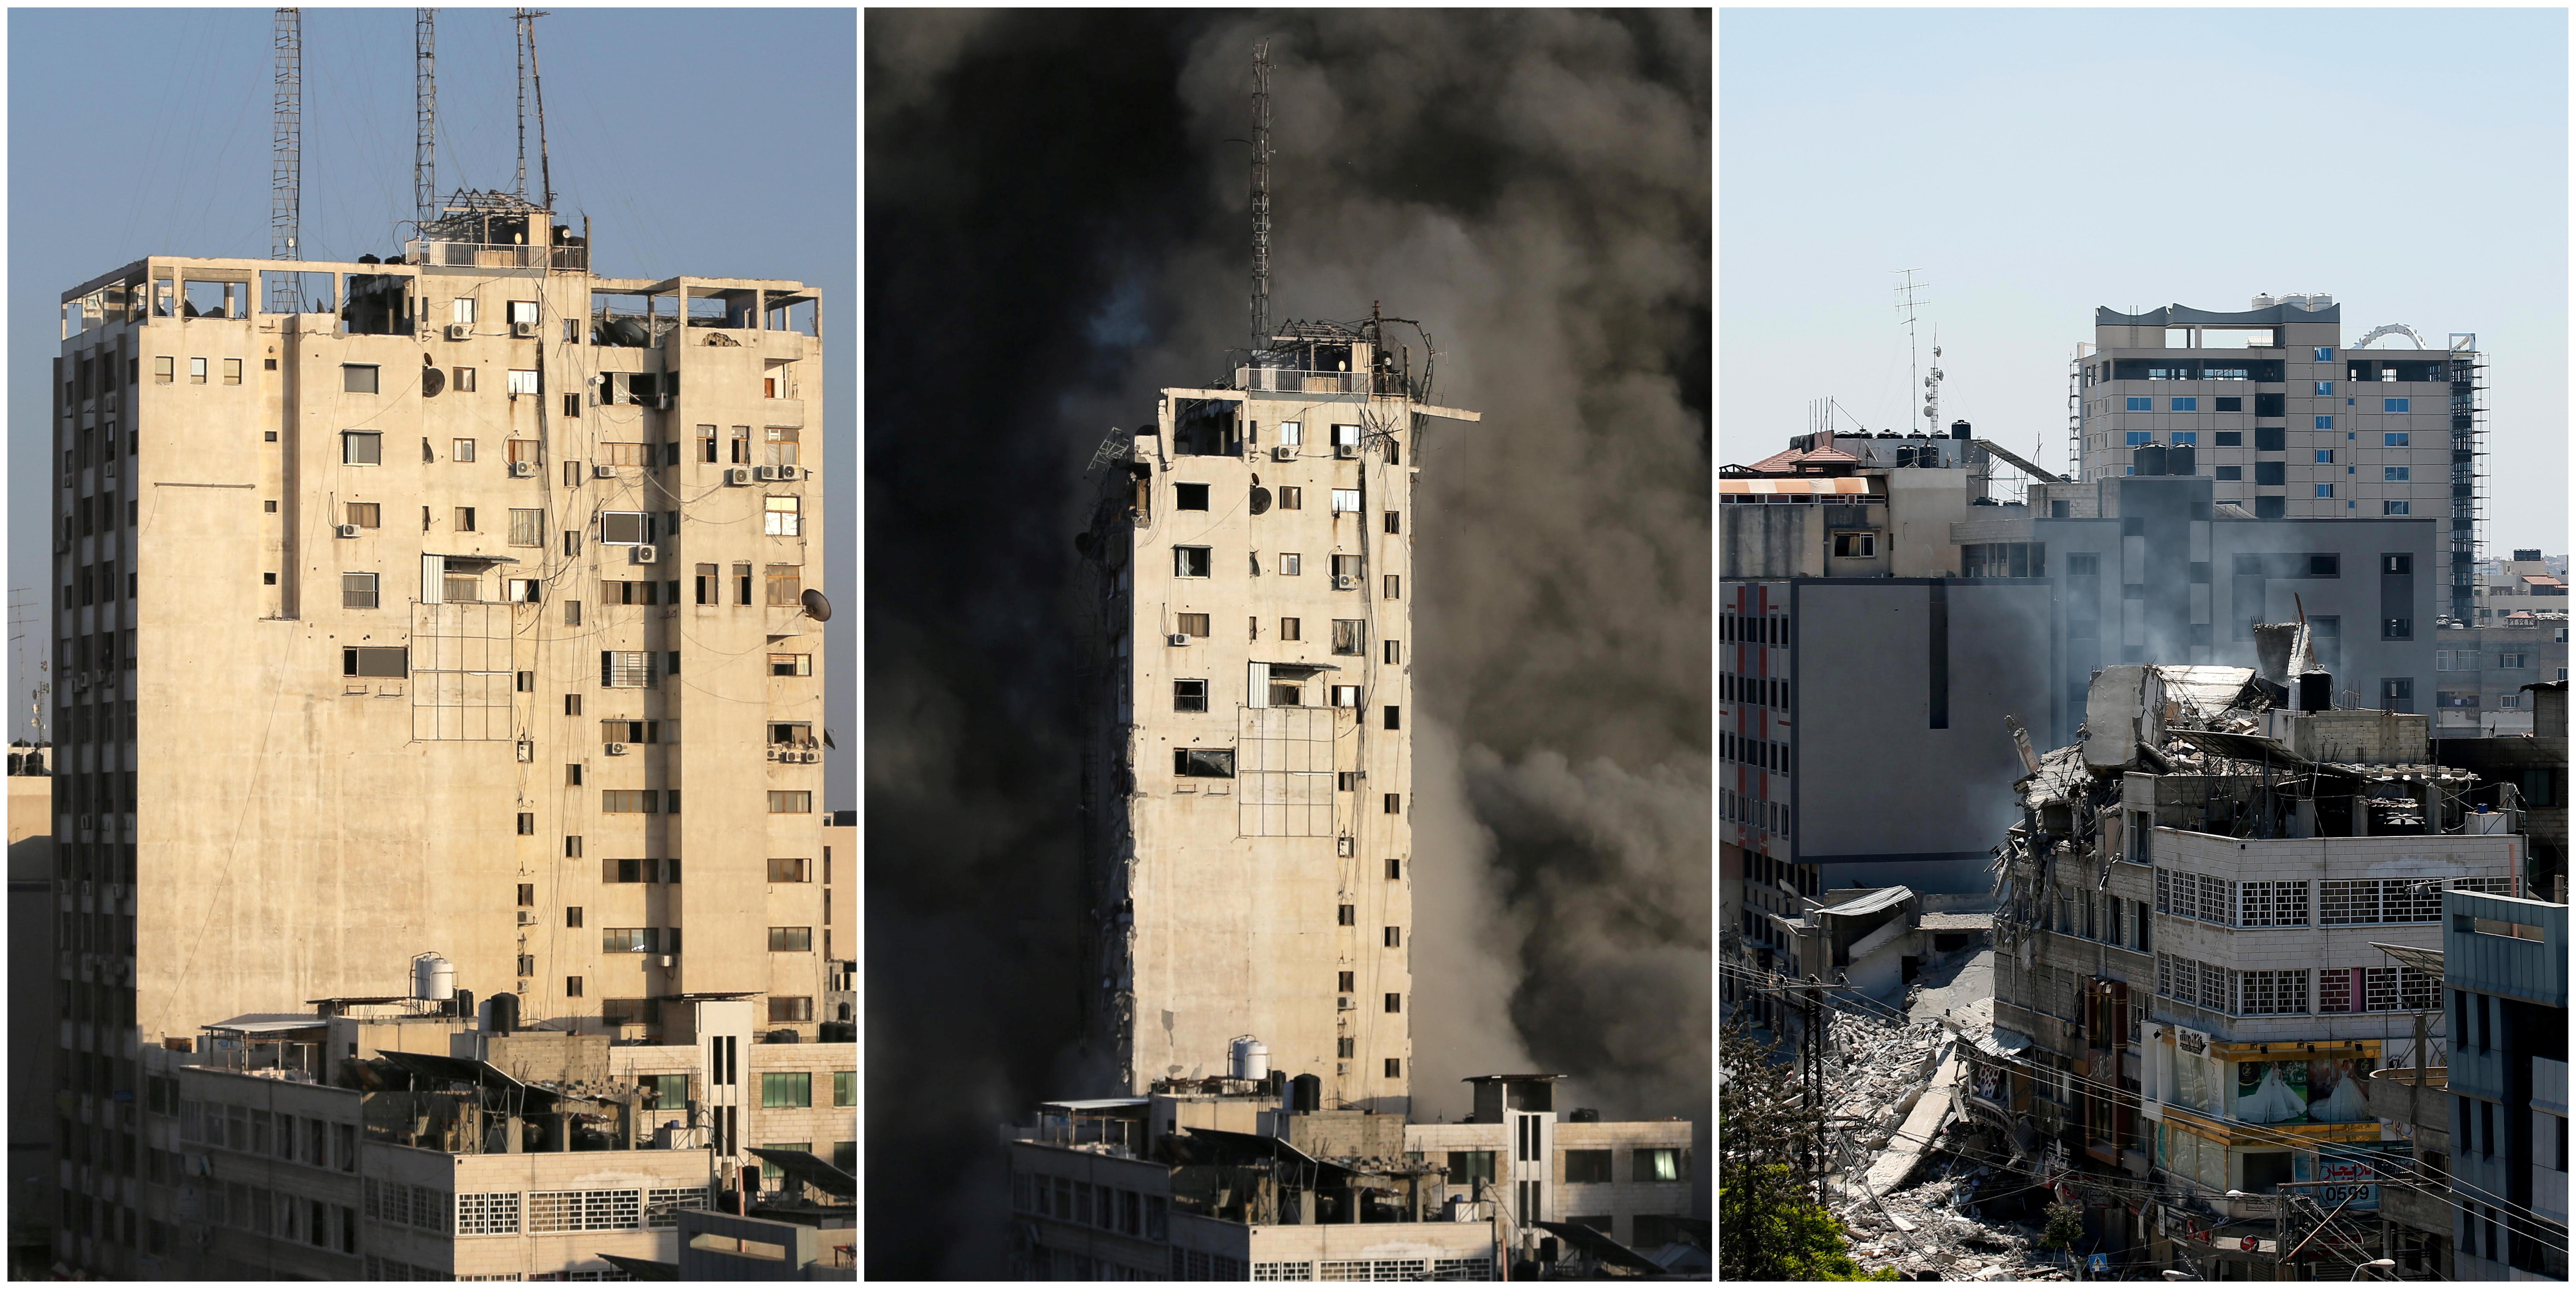 Combination picture shows a tower building before and after it was destroyed by Israeli air strikes in Gaza